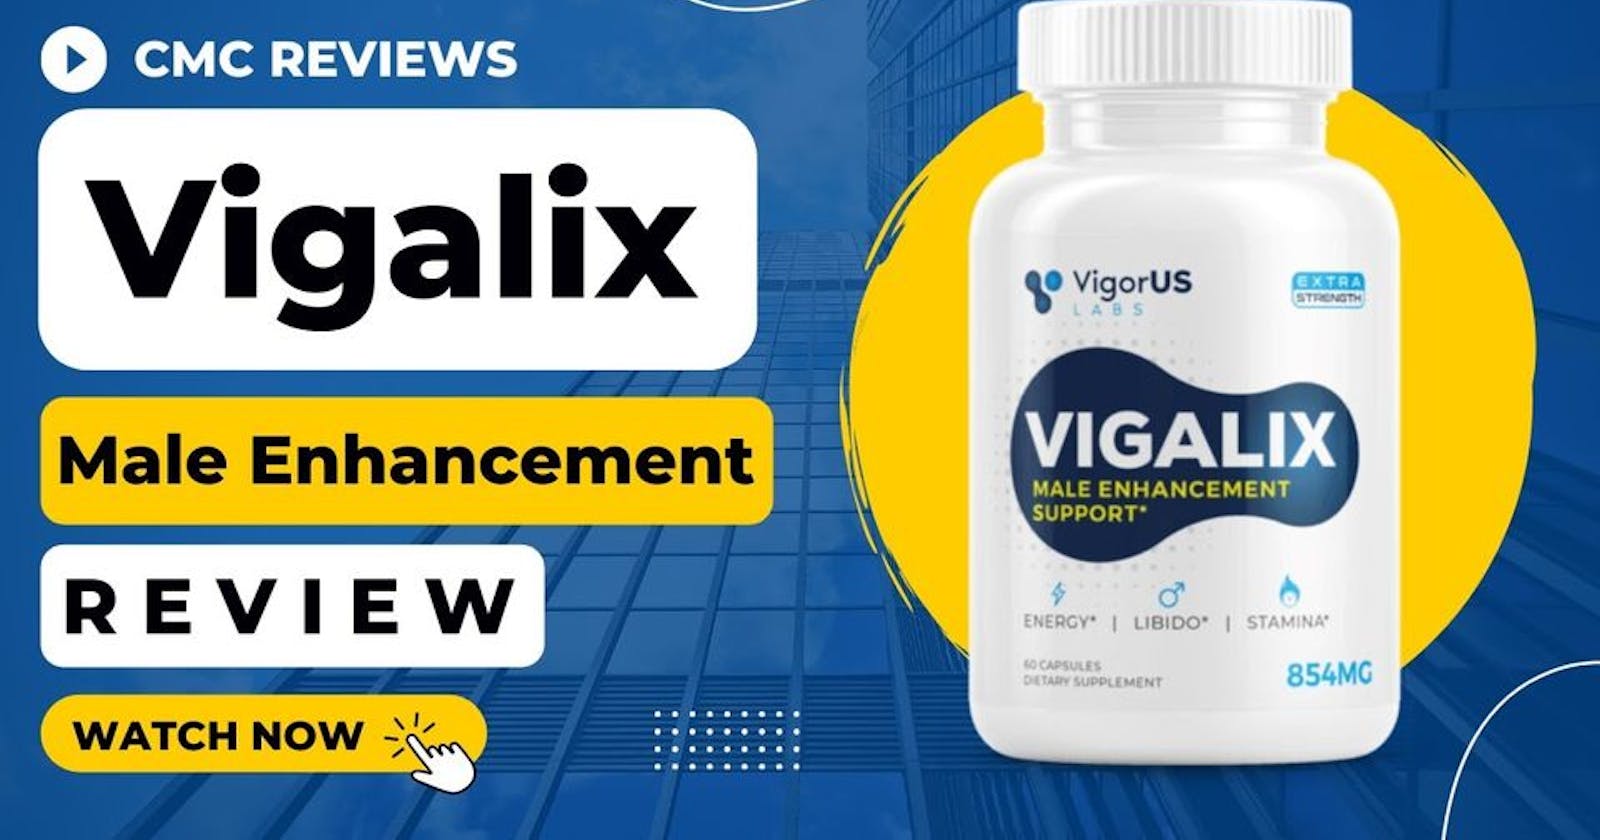 Vigalix Male Enhancement Reviews: Is It Legit or Fake Results? (Shocking Truth Revealed)